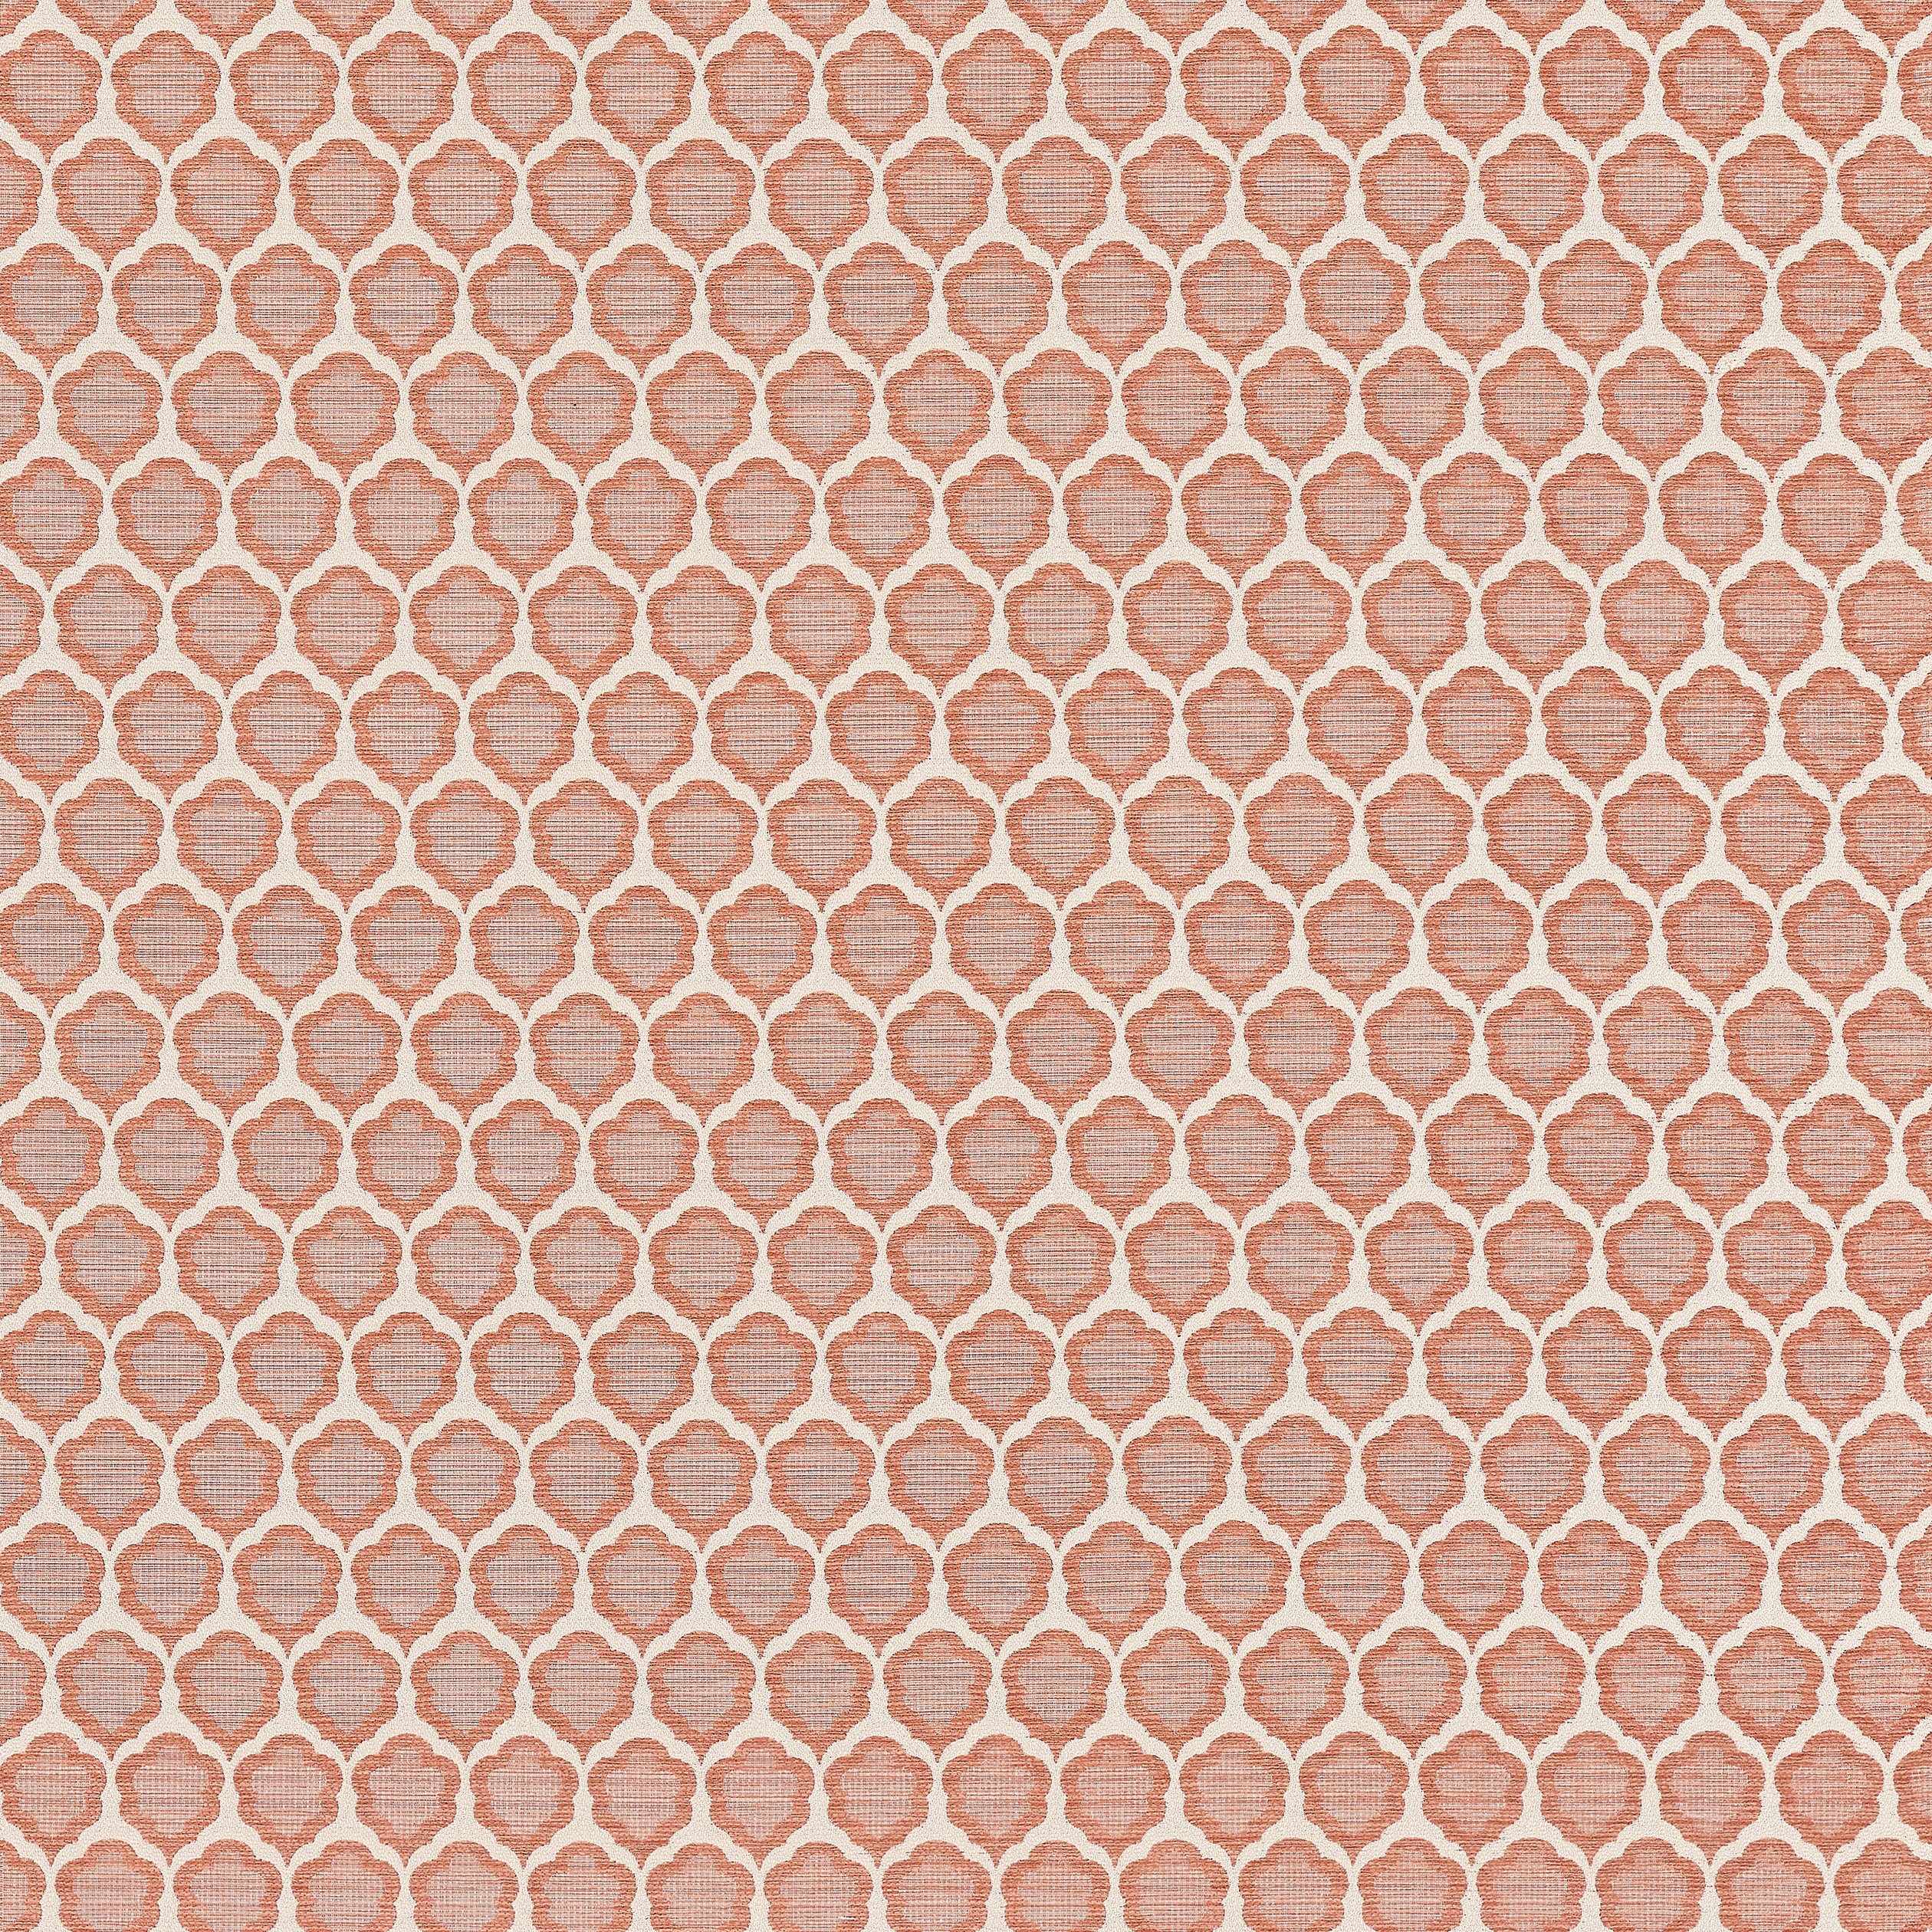 Genie fabric in terracotta color - pattern number W81929 - by Thibaut in the Companions collection